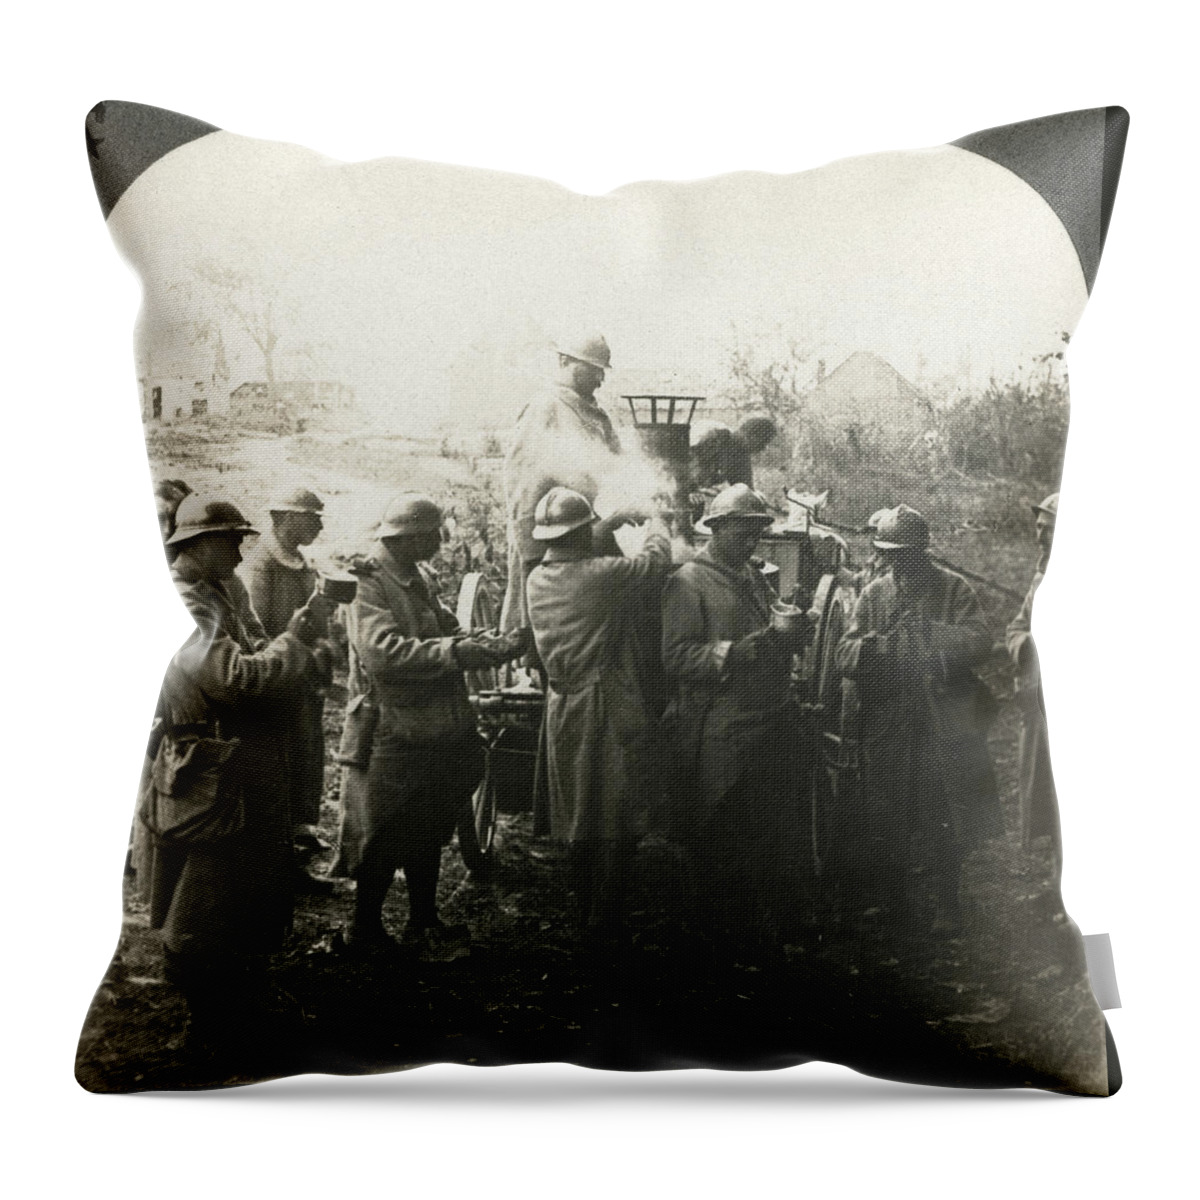 1914 Throw Pillow featuring the painting World War I Field Kitchen by Granger